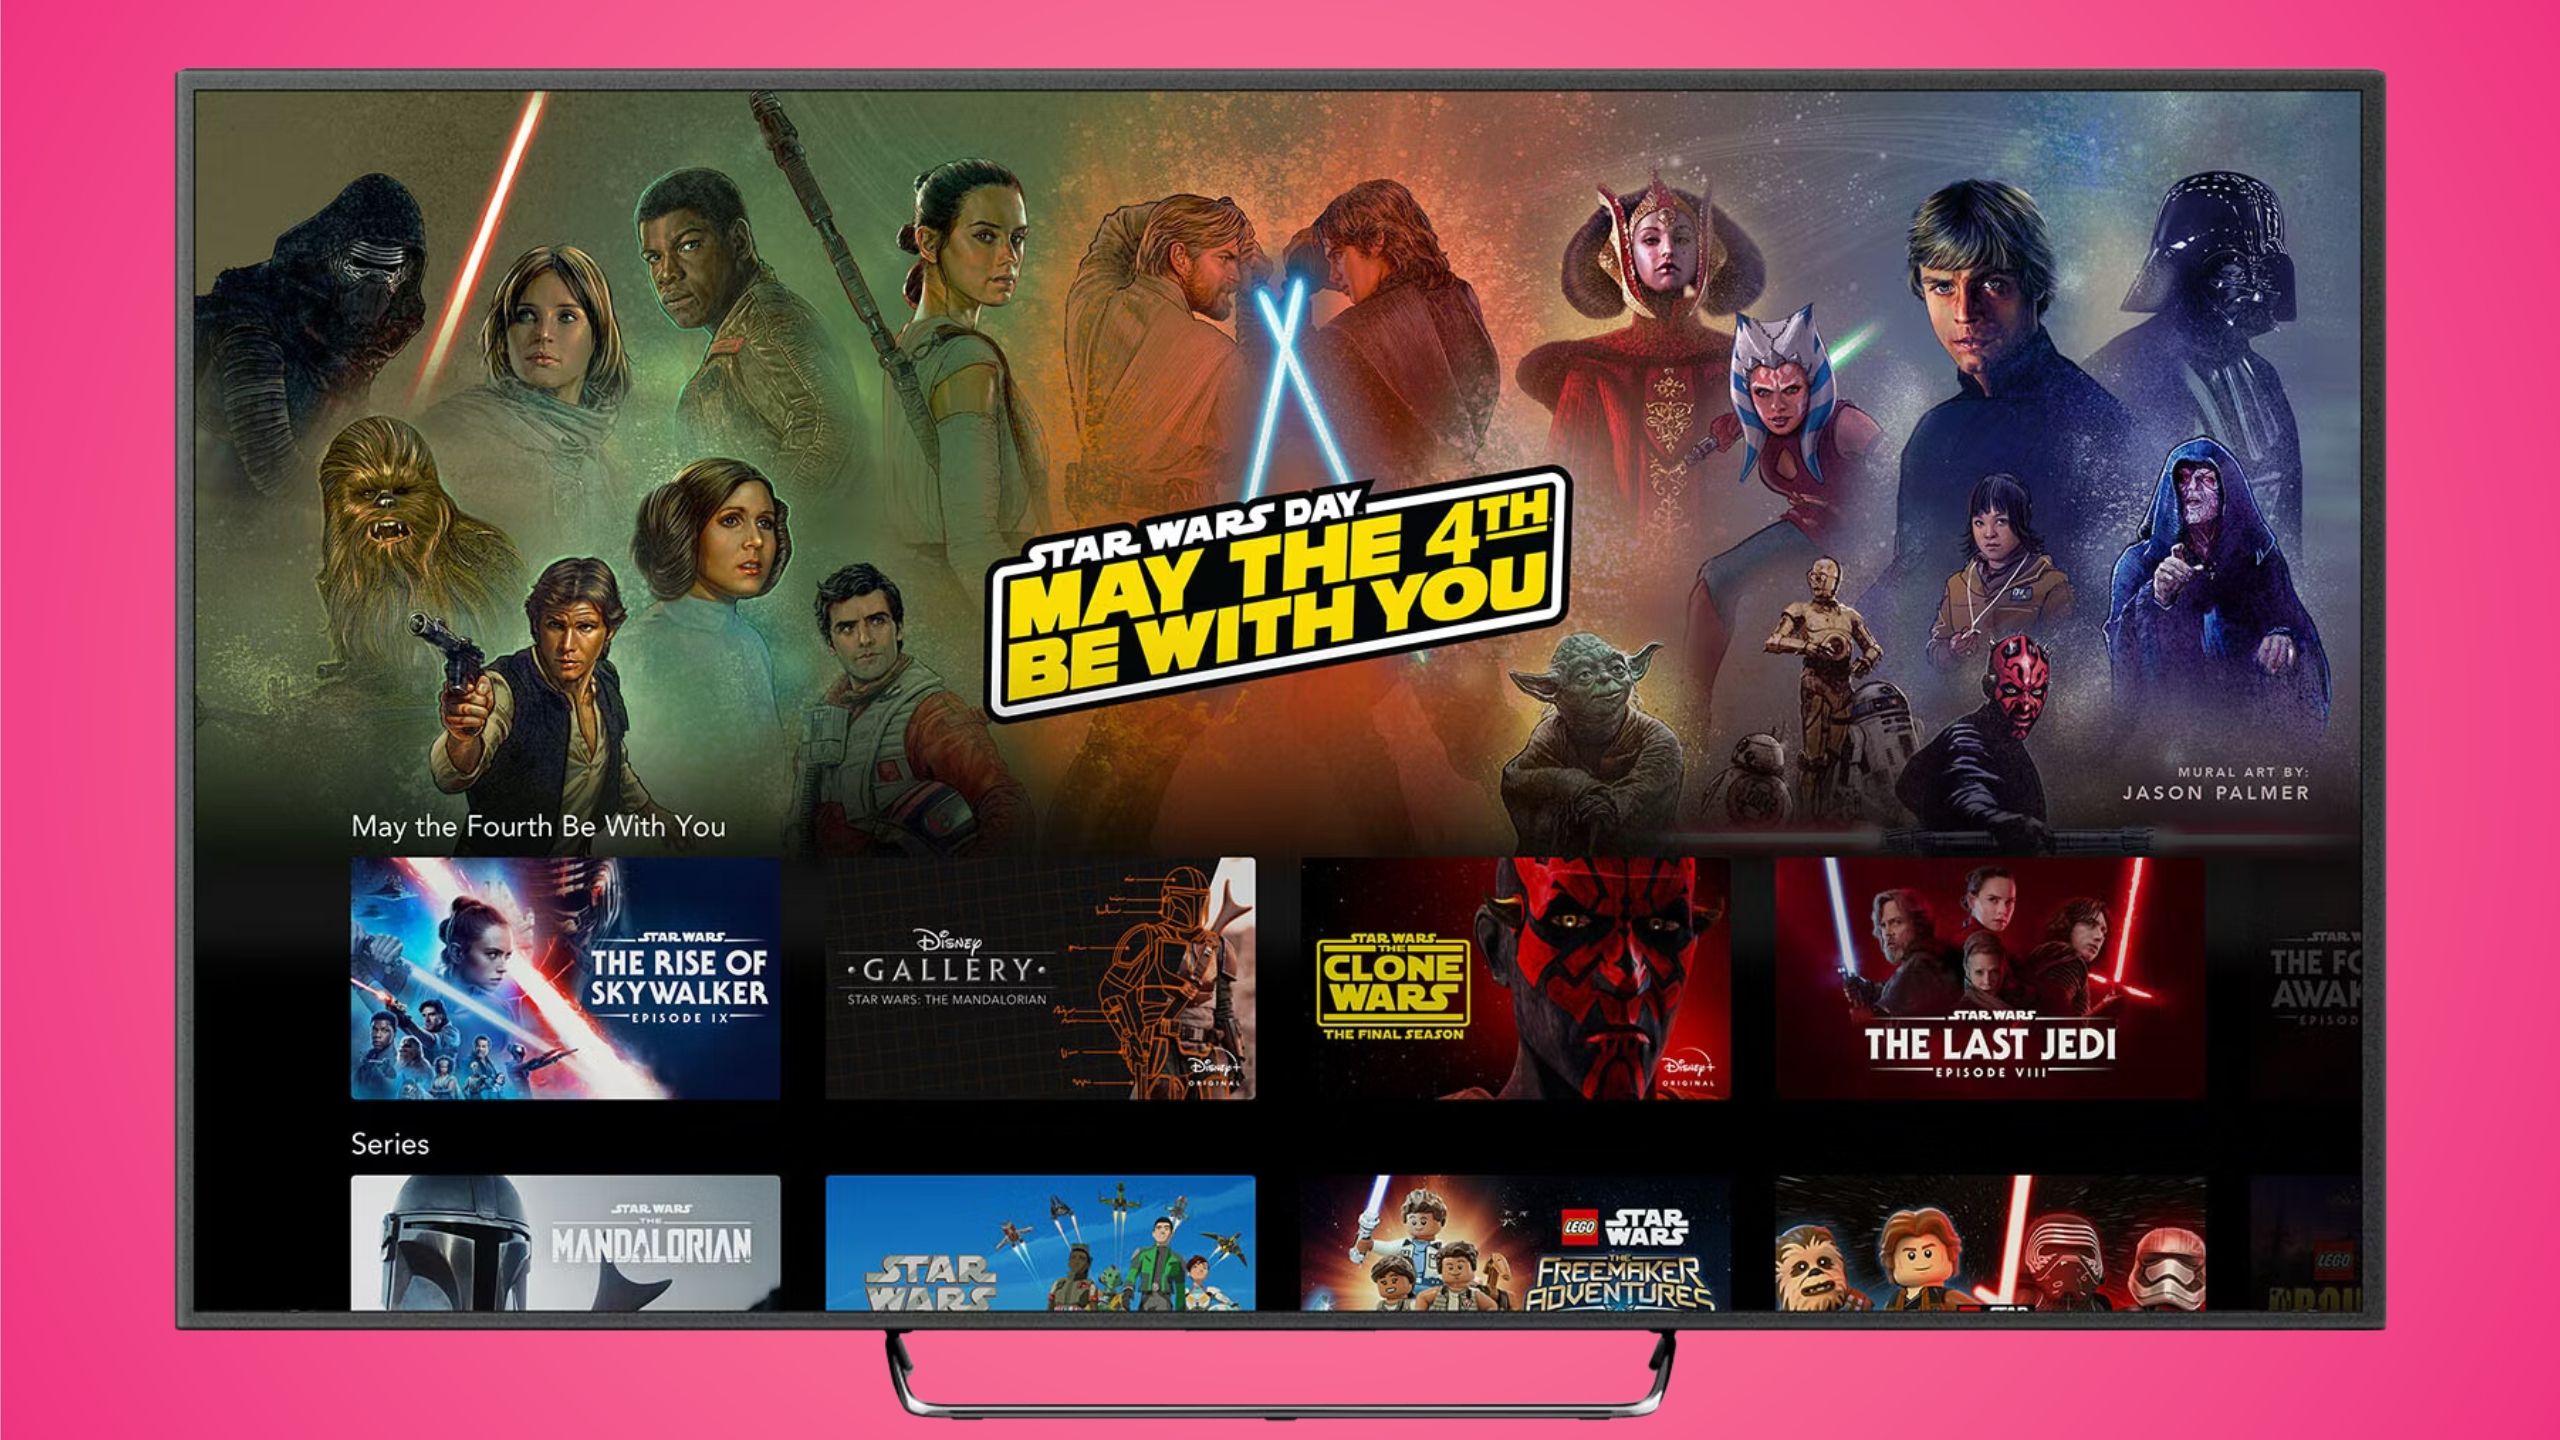 Disney+ Star Wars Takeover screen appears on TV